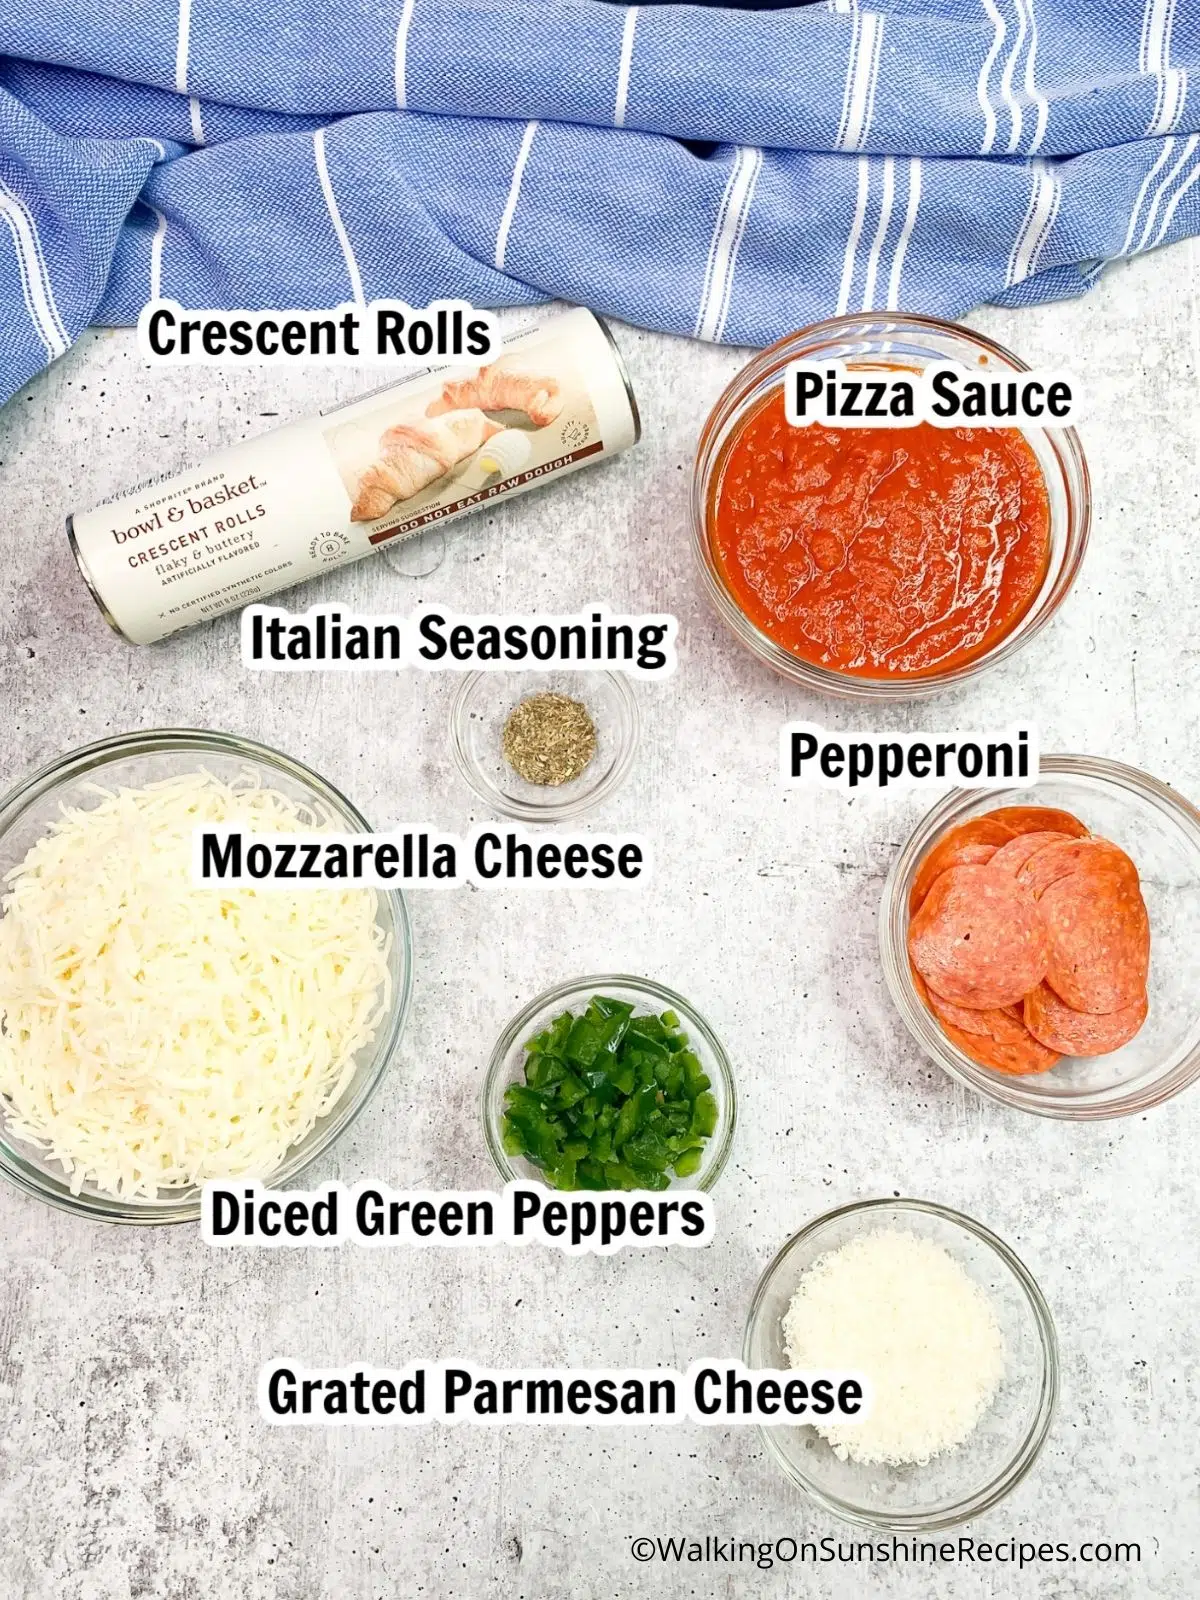 Ingredients for pizza made with refrigerator crescent rolls.